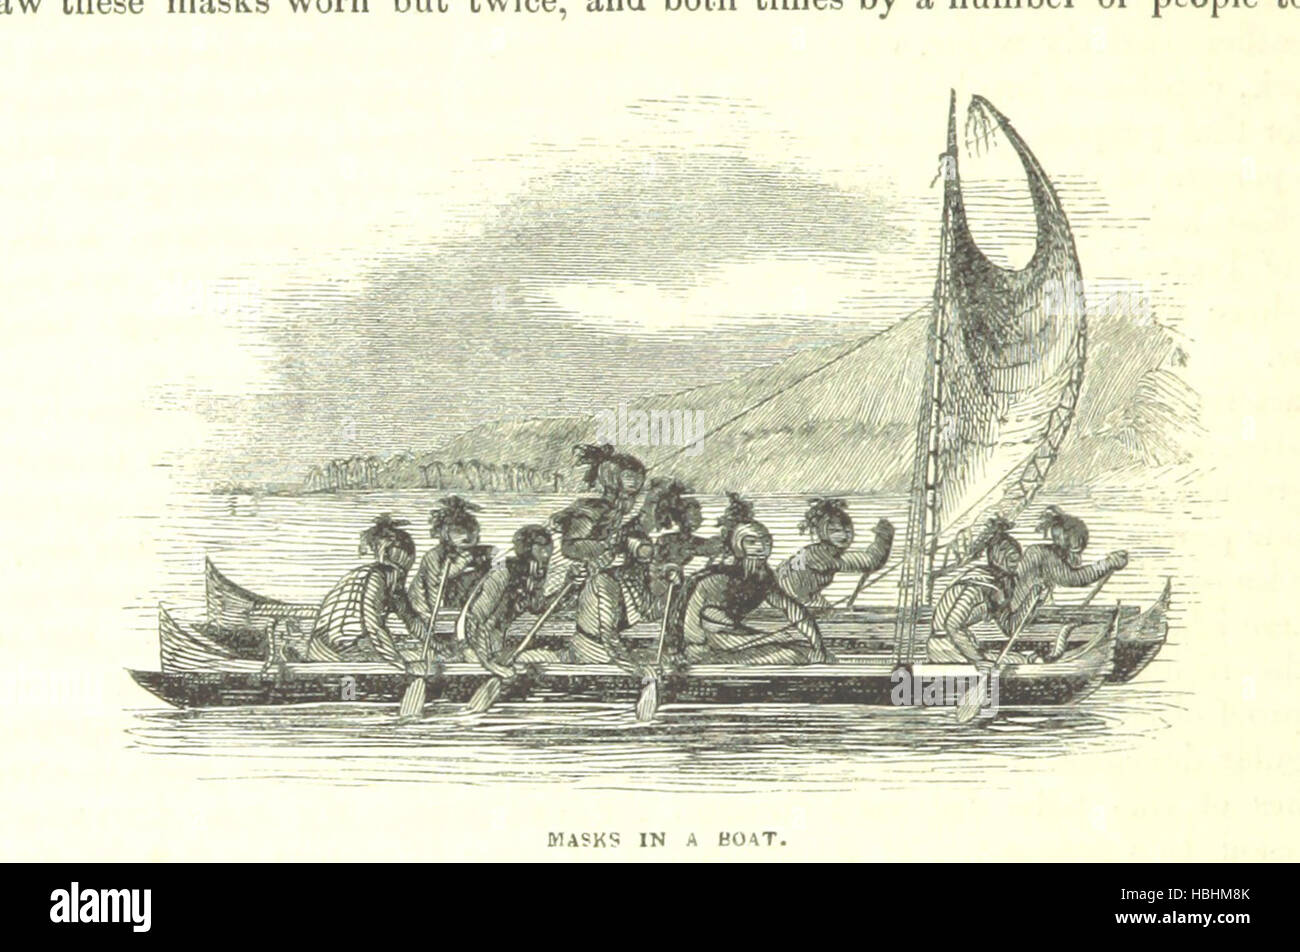 Image taken from page 476 of '[The Voyages of Captain Stock Photo